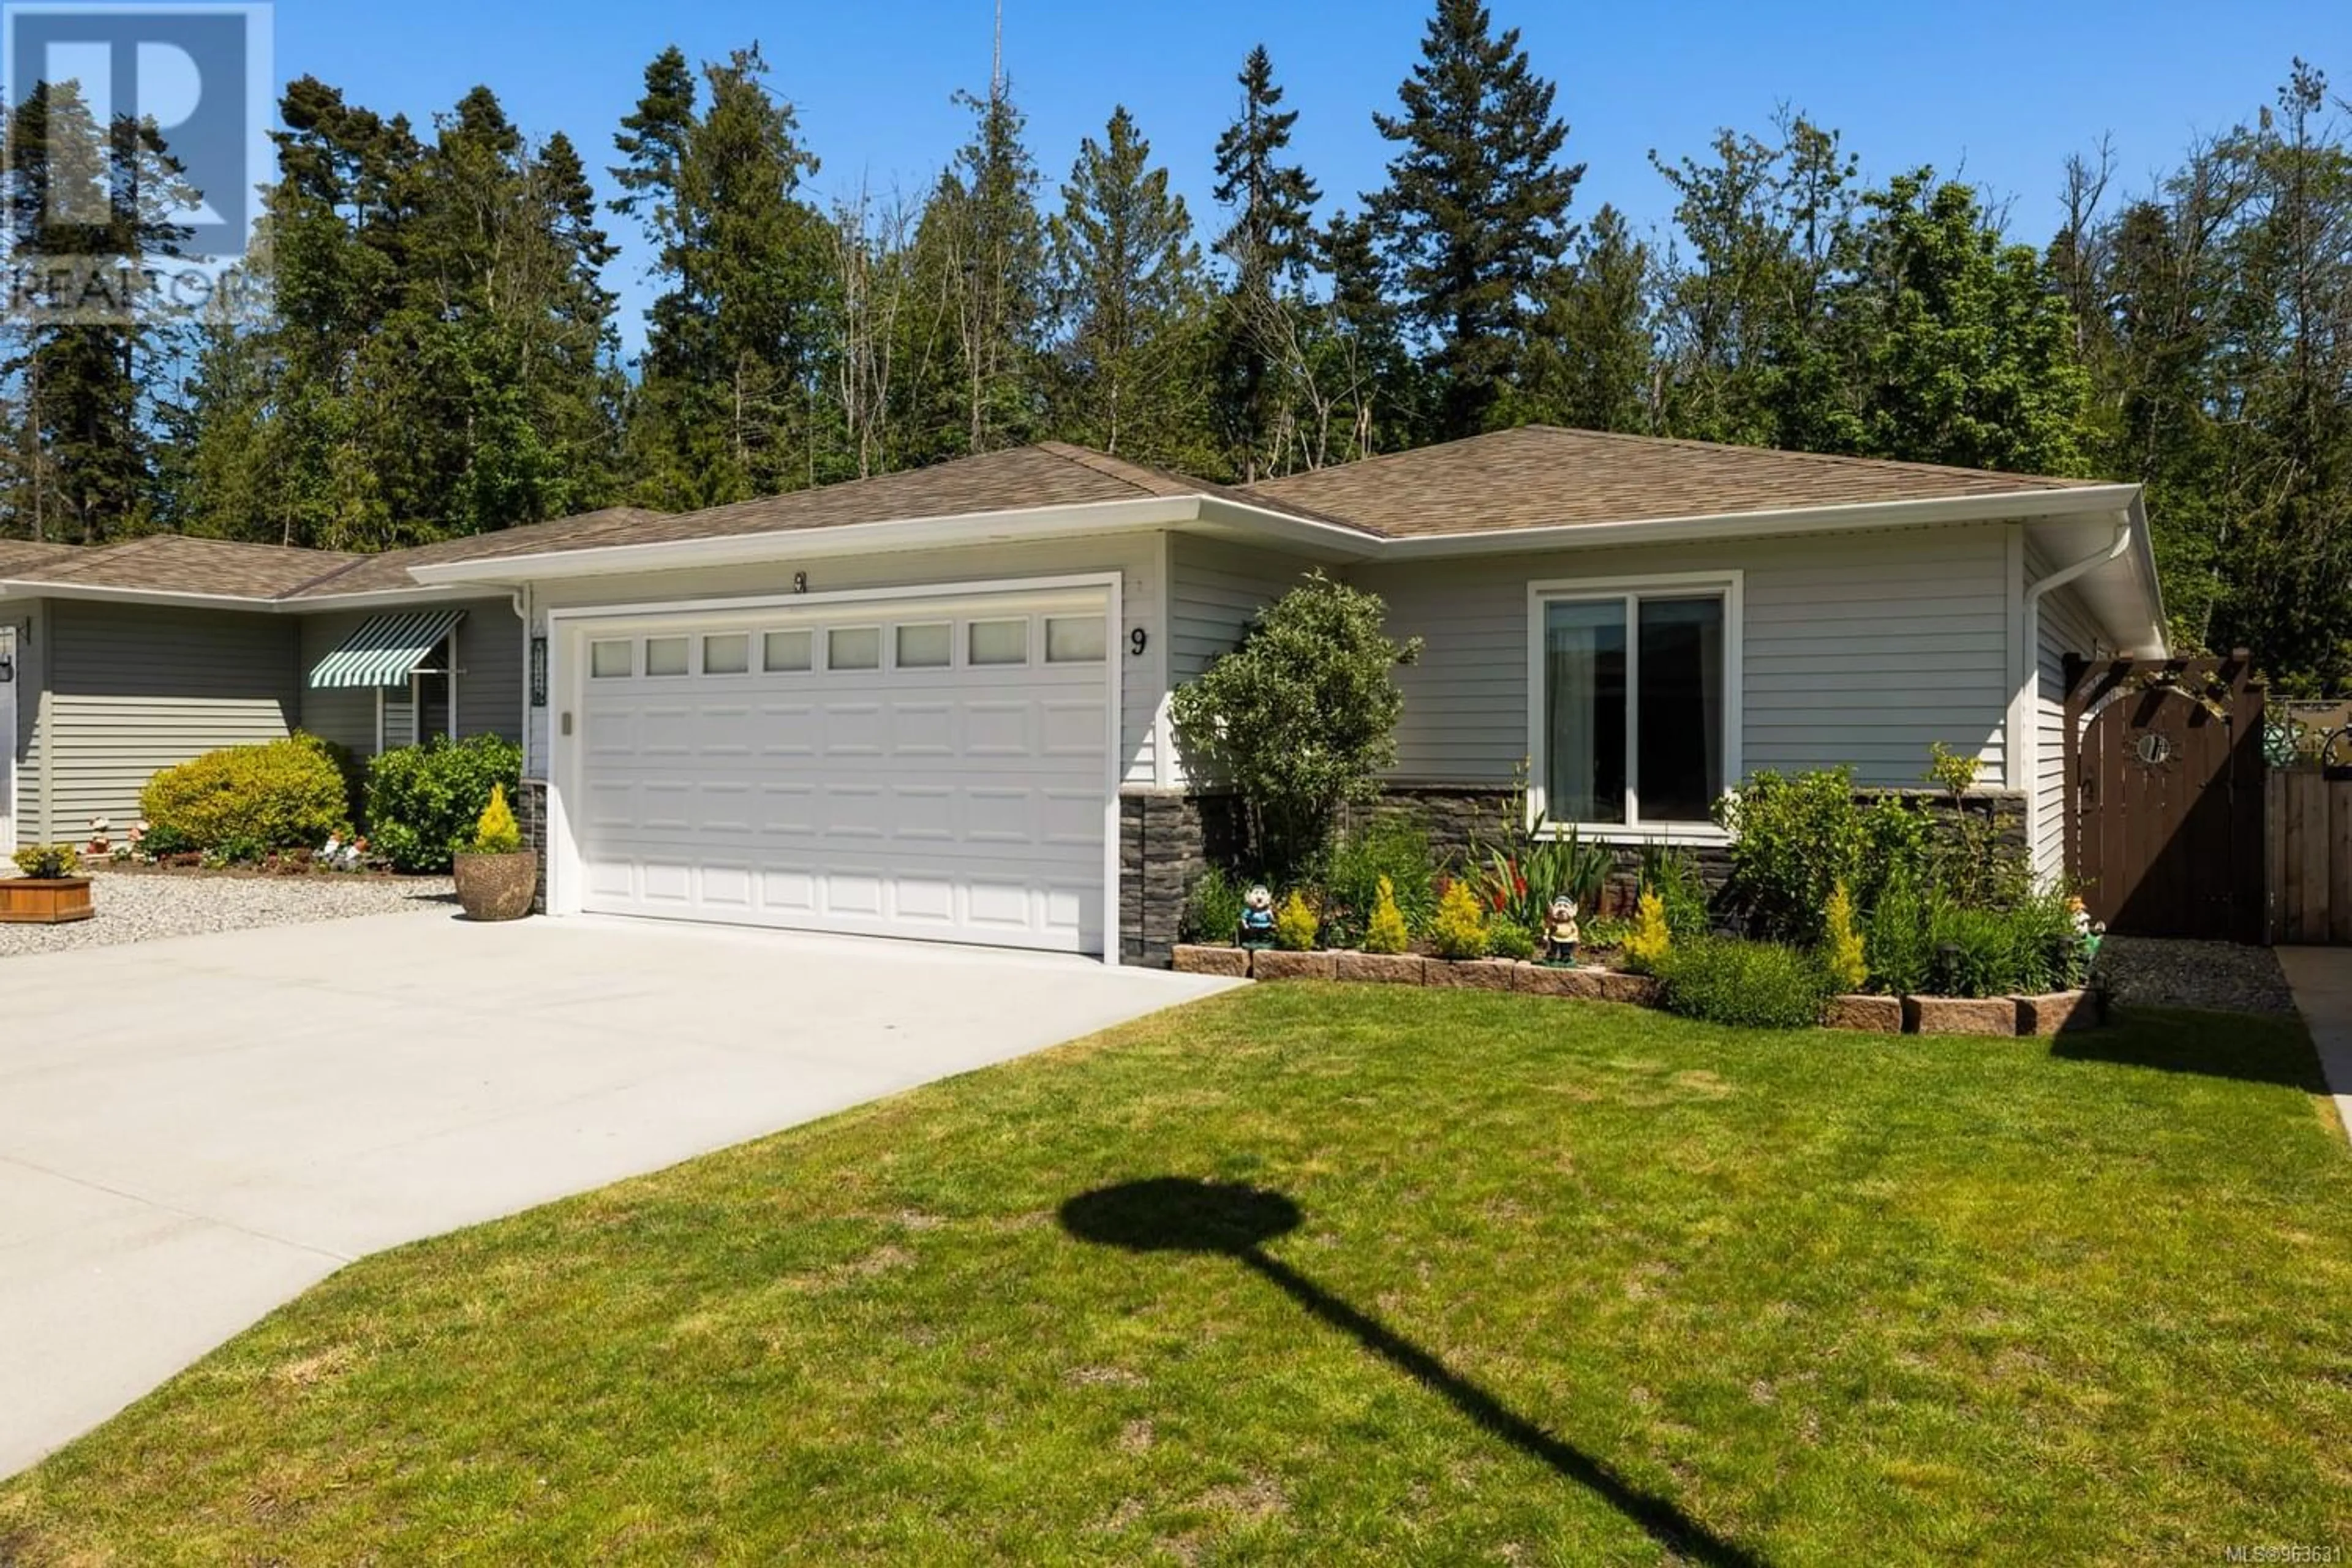 Home with vinyl exterior material for 9 7586 Tetayut Rd, Central Saanich British Columbia V8M0B4